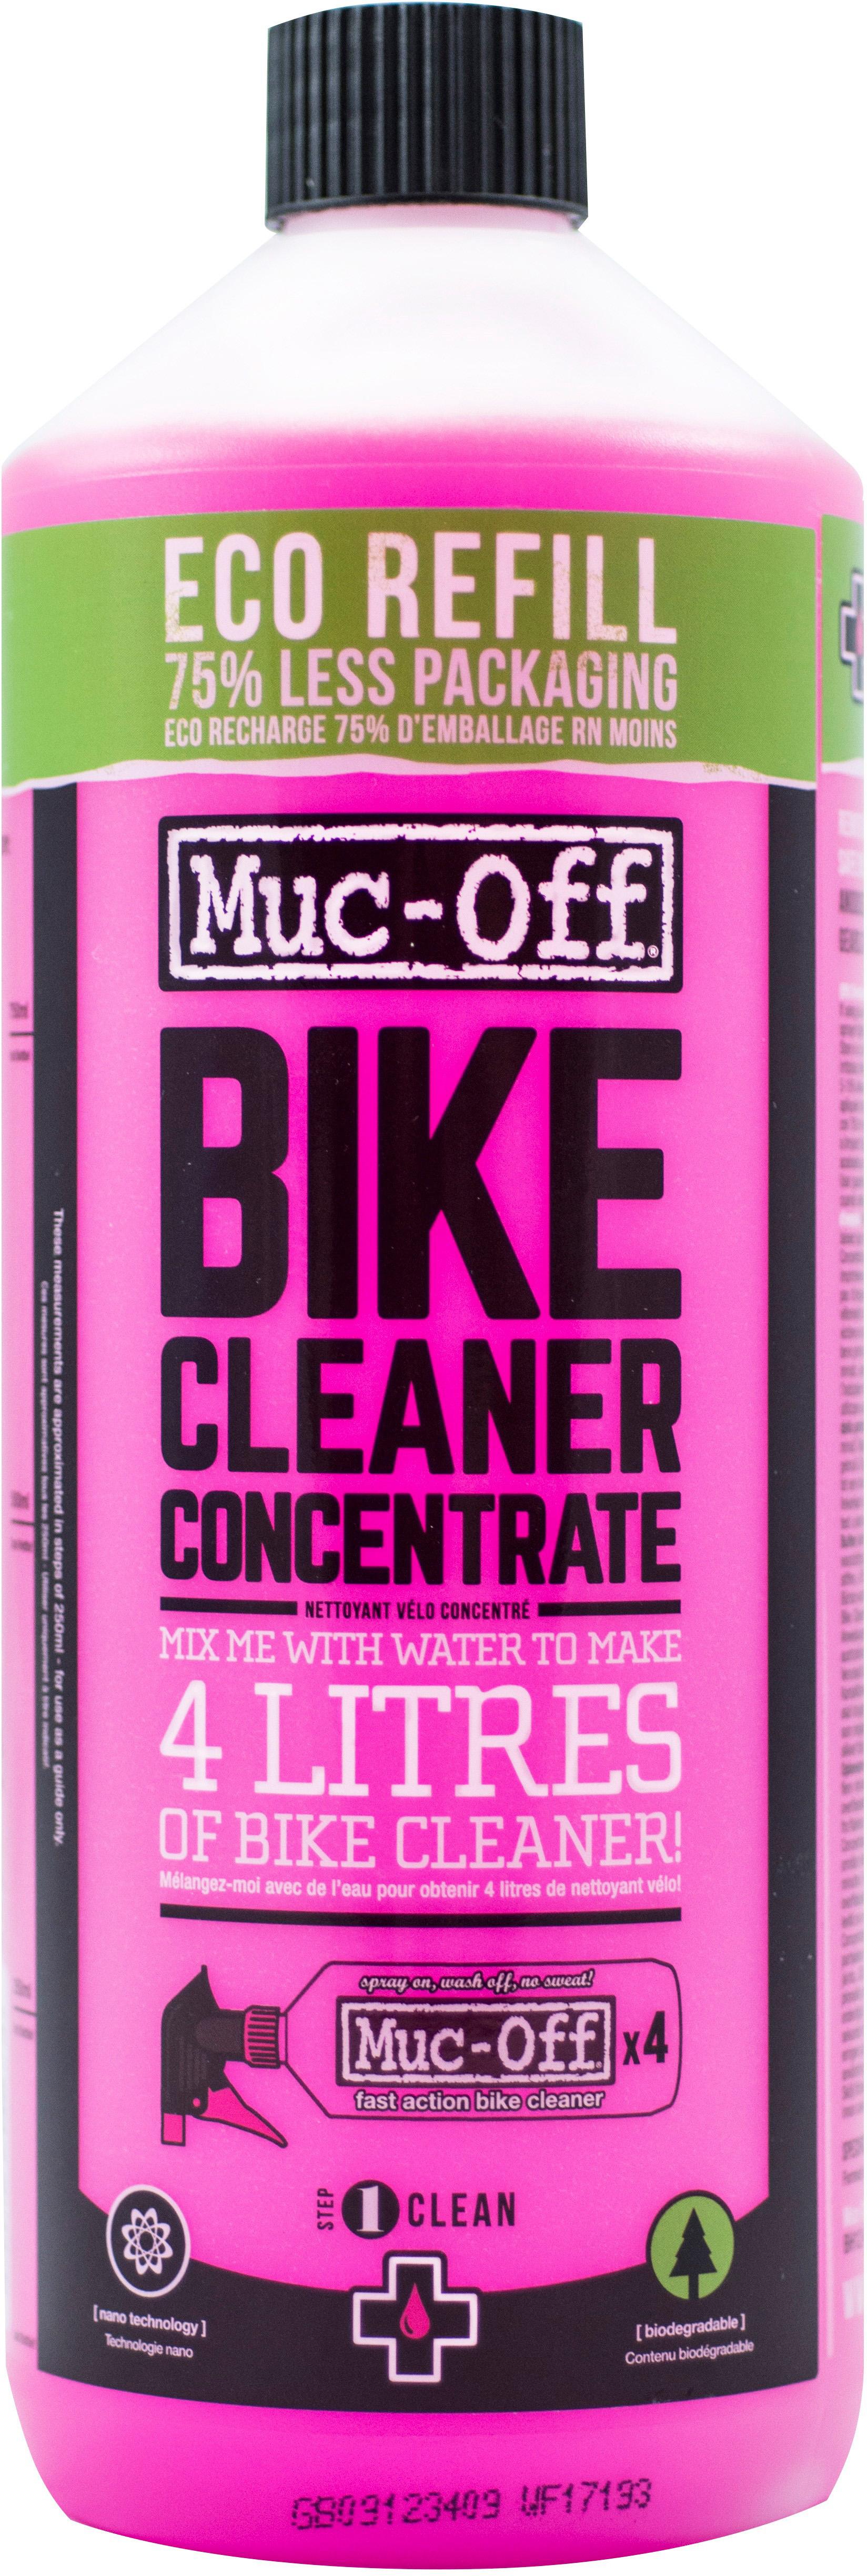 Muc-off Bike Cleaner Concentrate (1 Litre)  Pink